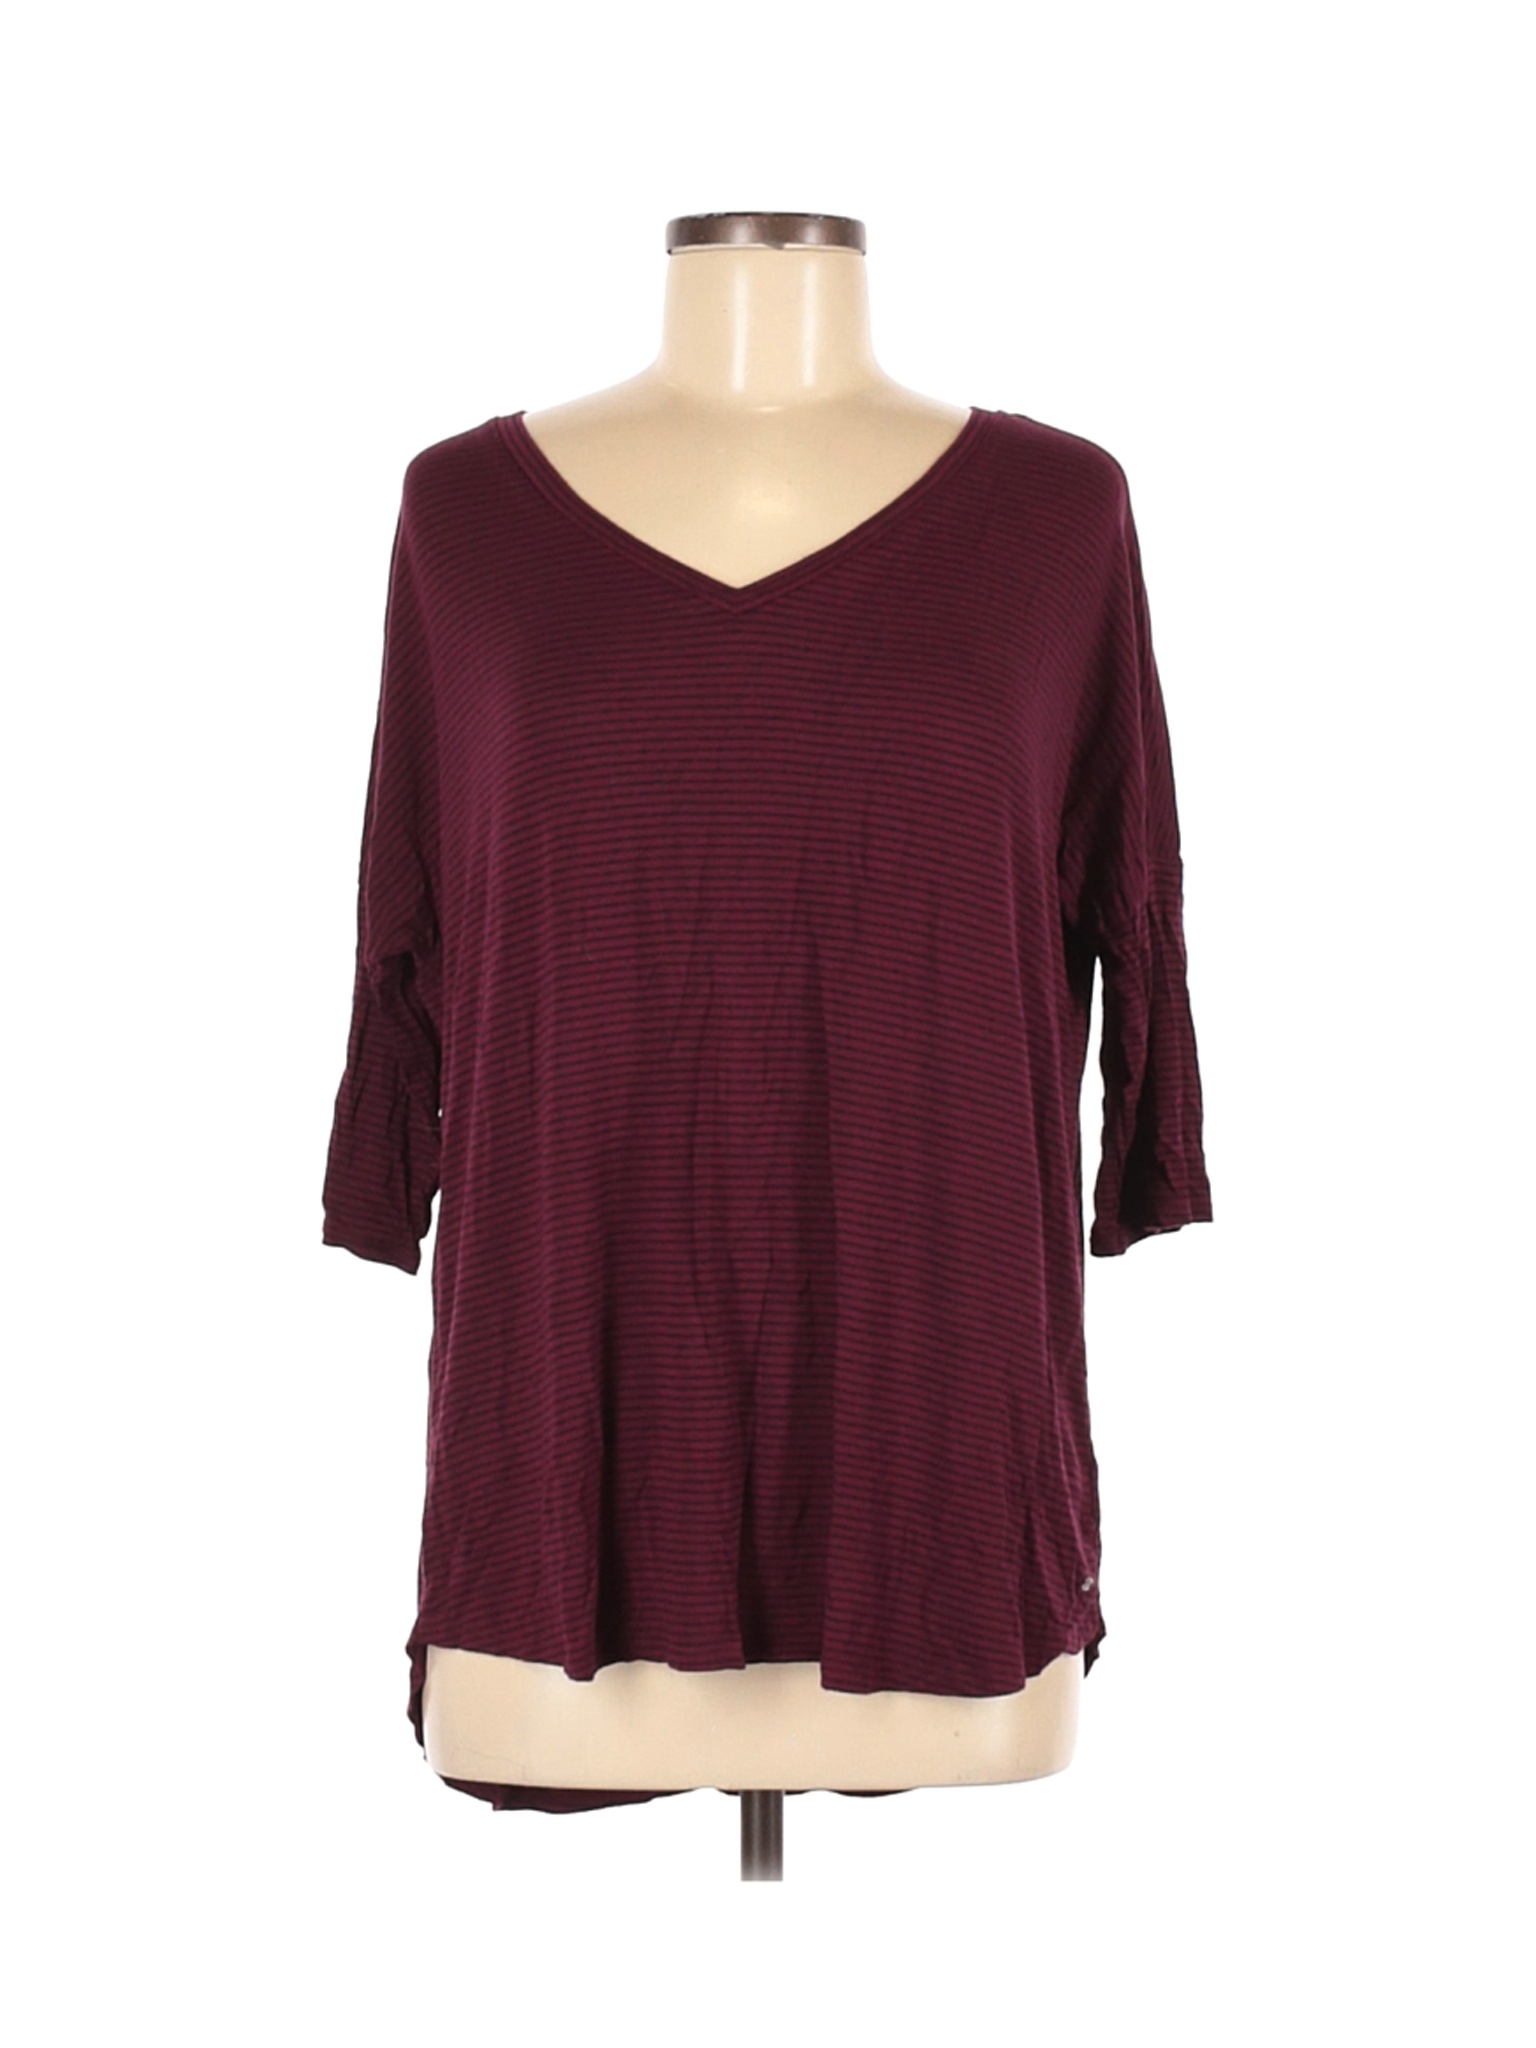 American Eagle Outfitters Women Red 3/4 Sleeve Top M | eBay